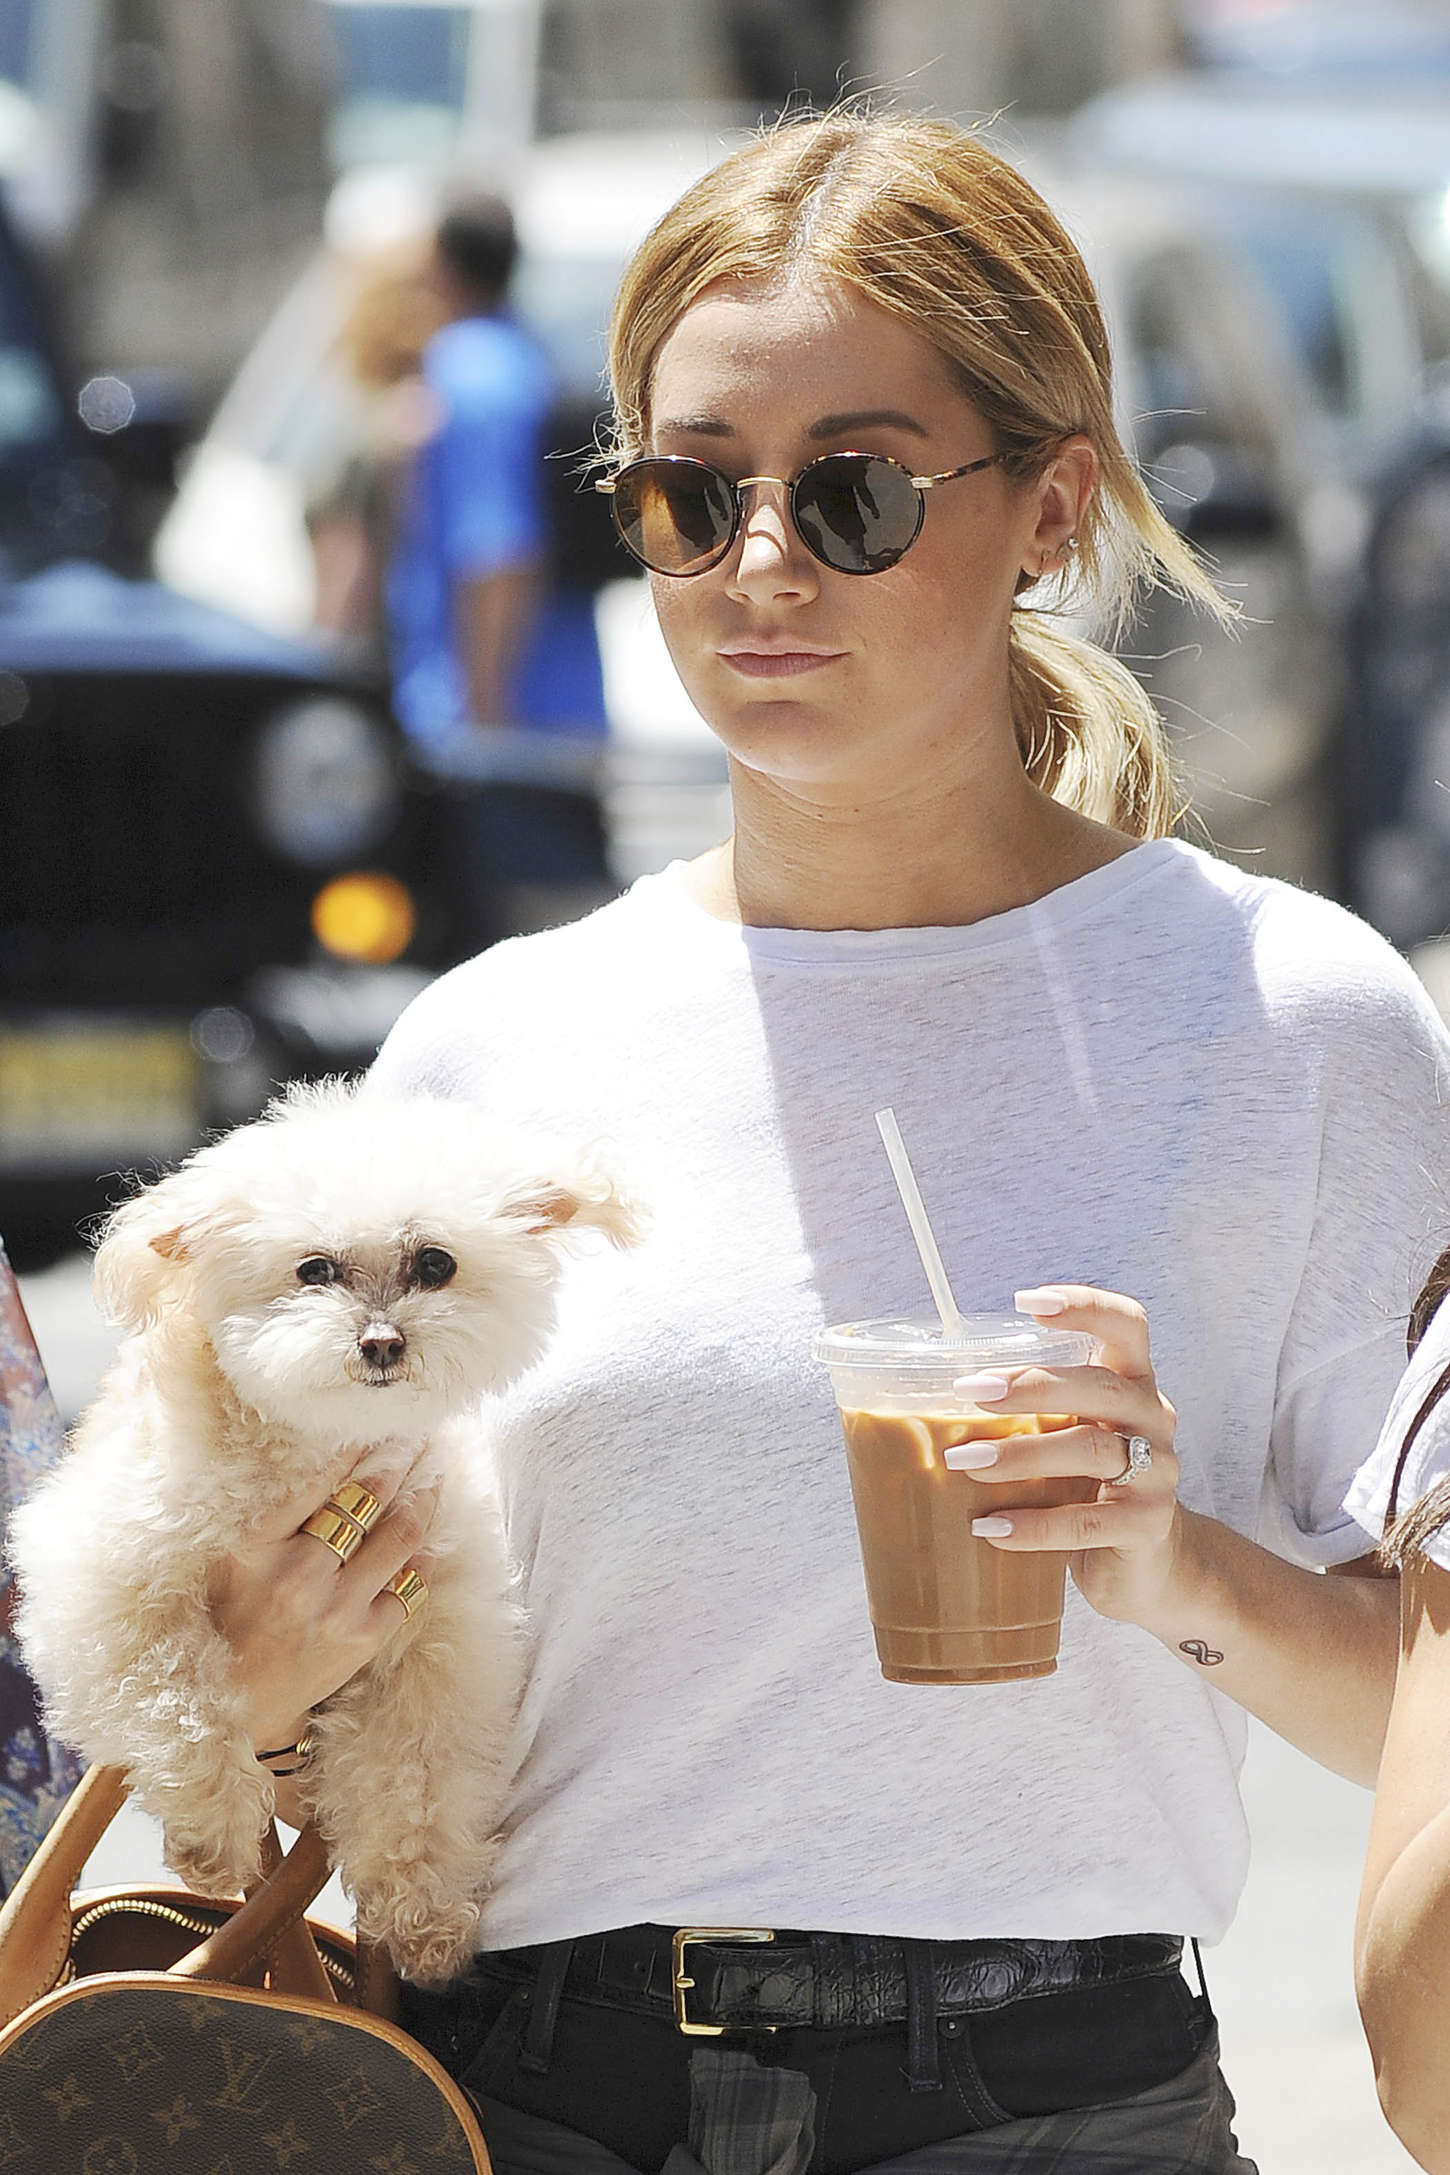 Ashley Tisdale walking in the street with an iced coffee in her hand and Bichon Frise puppy in her other hand